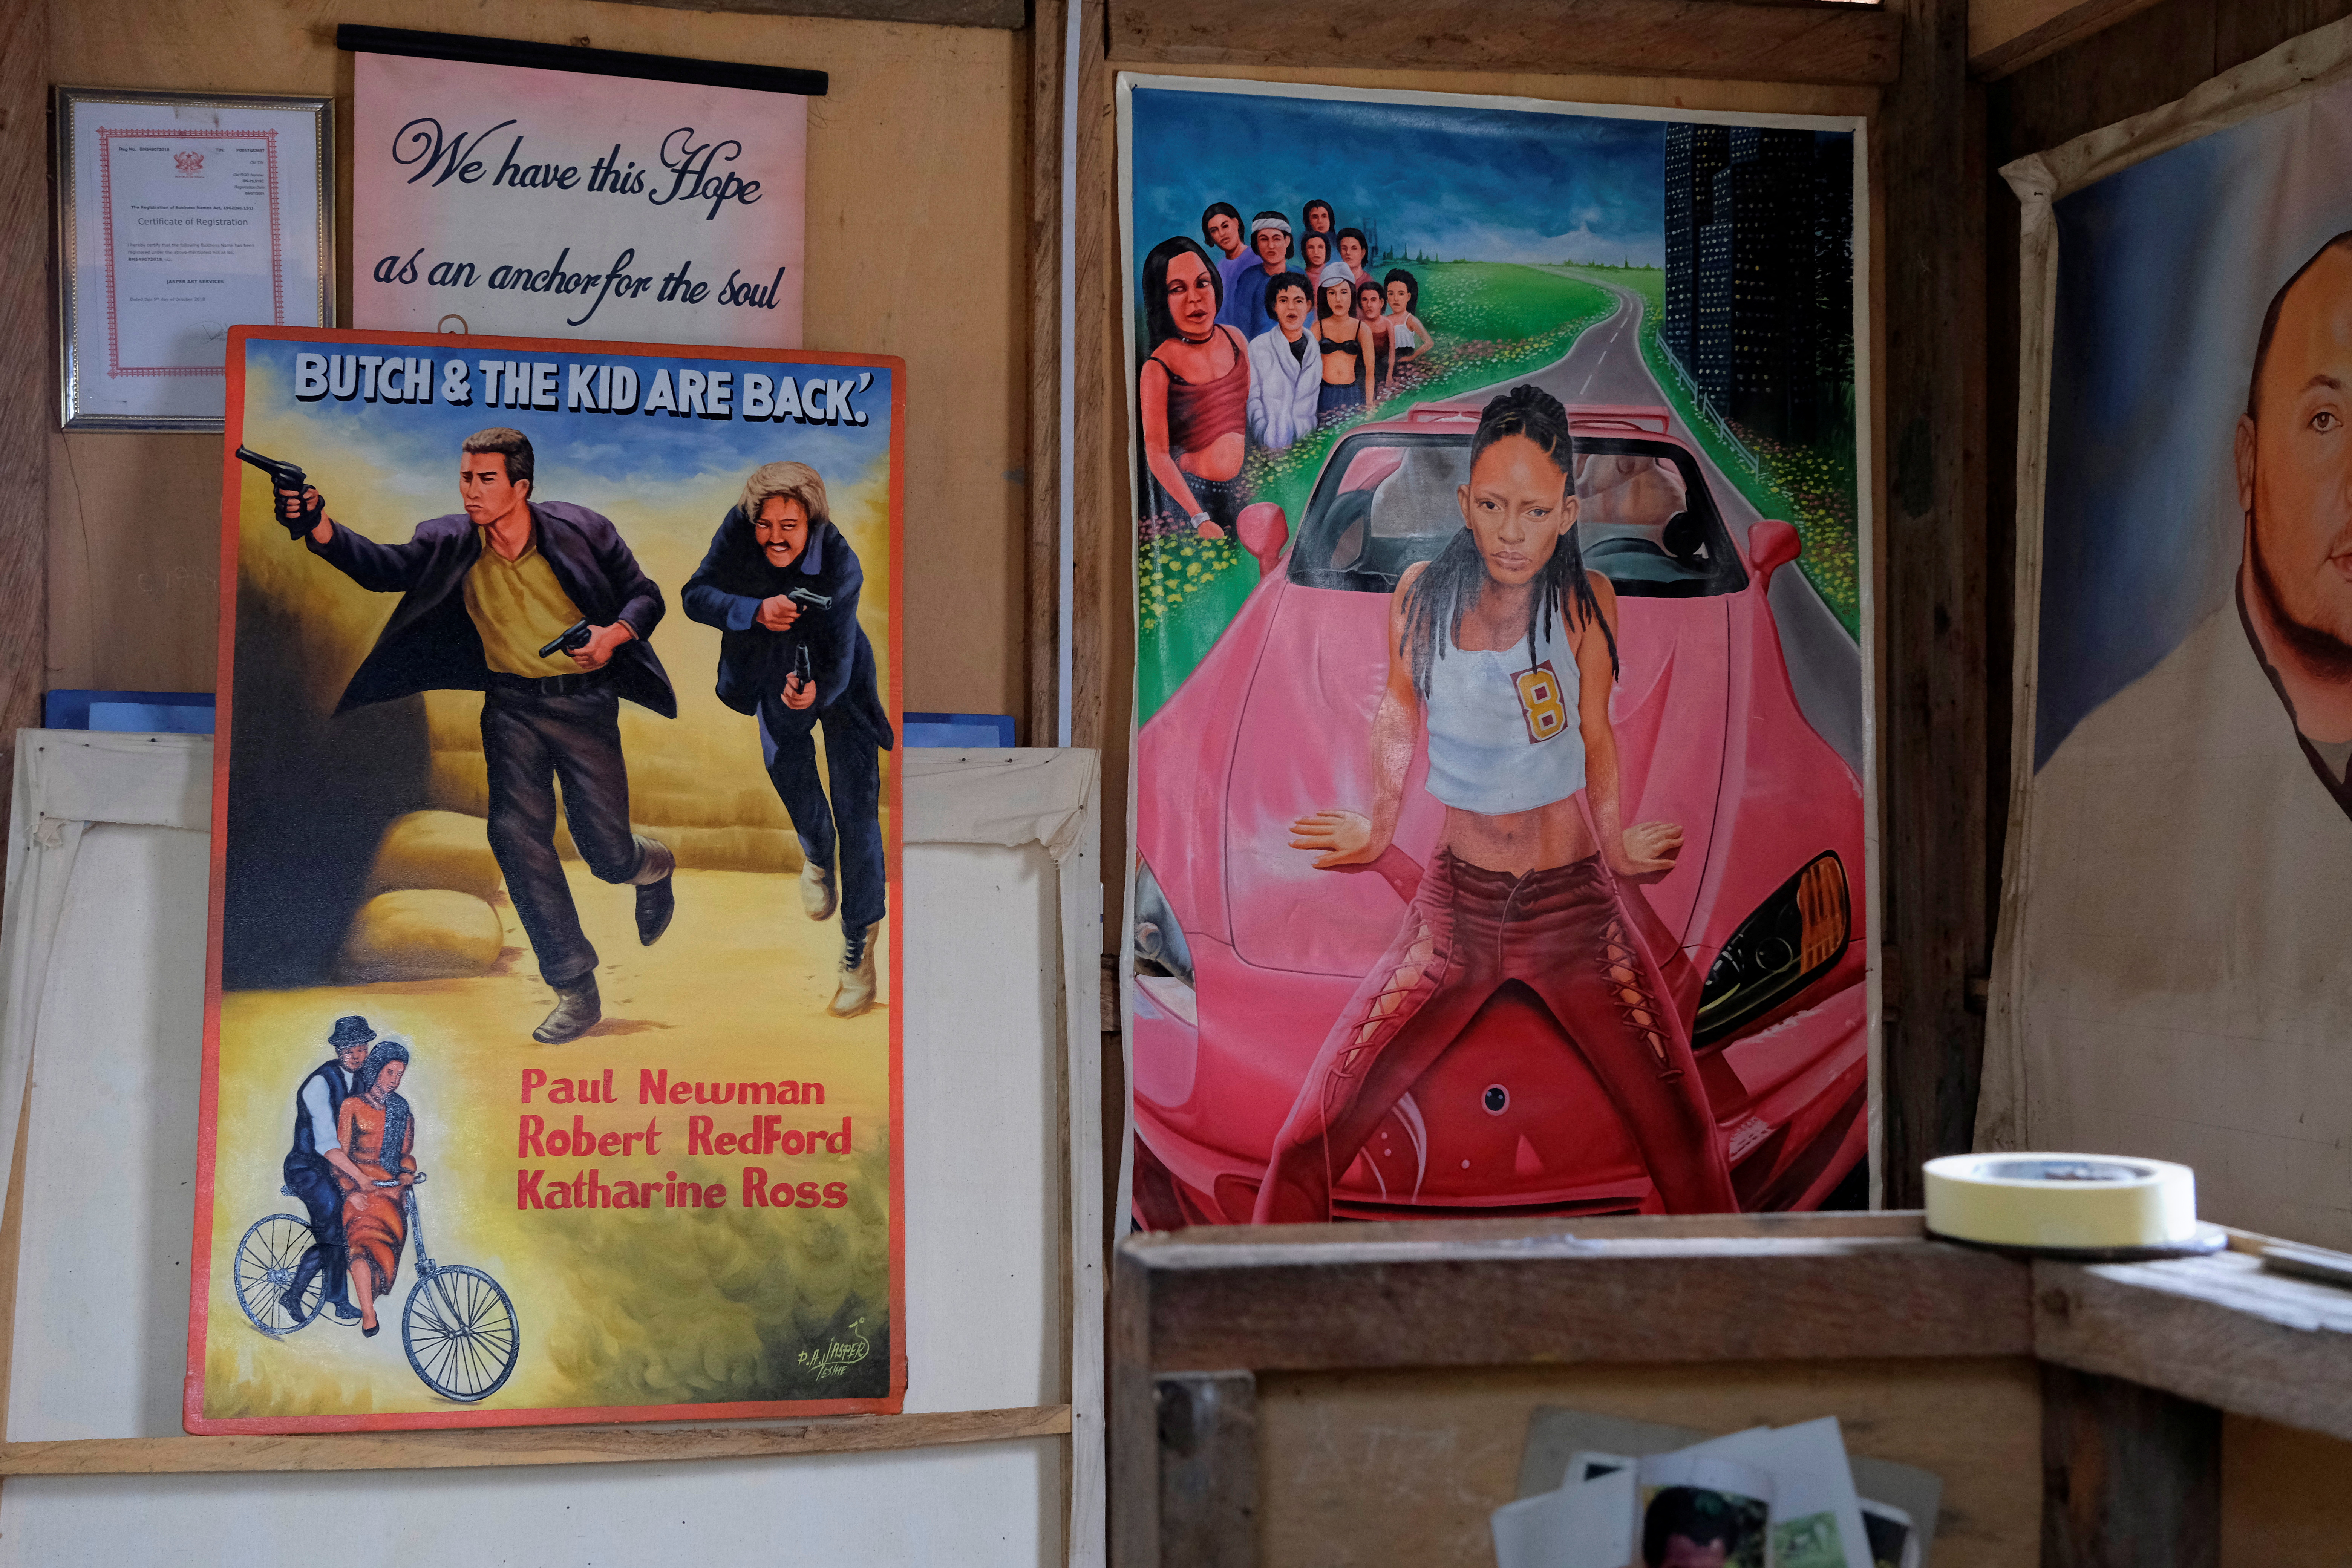 Movie posters commissioned for foreign client are seen in Accra